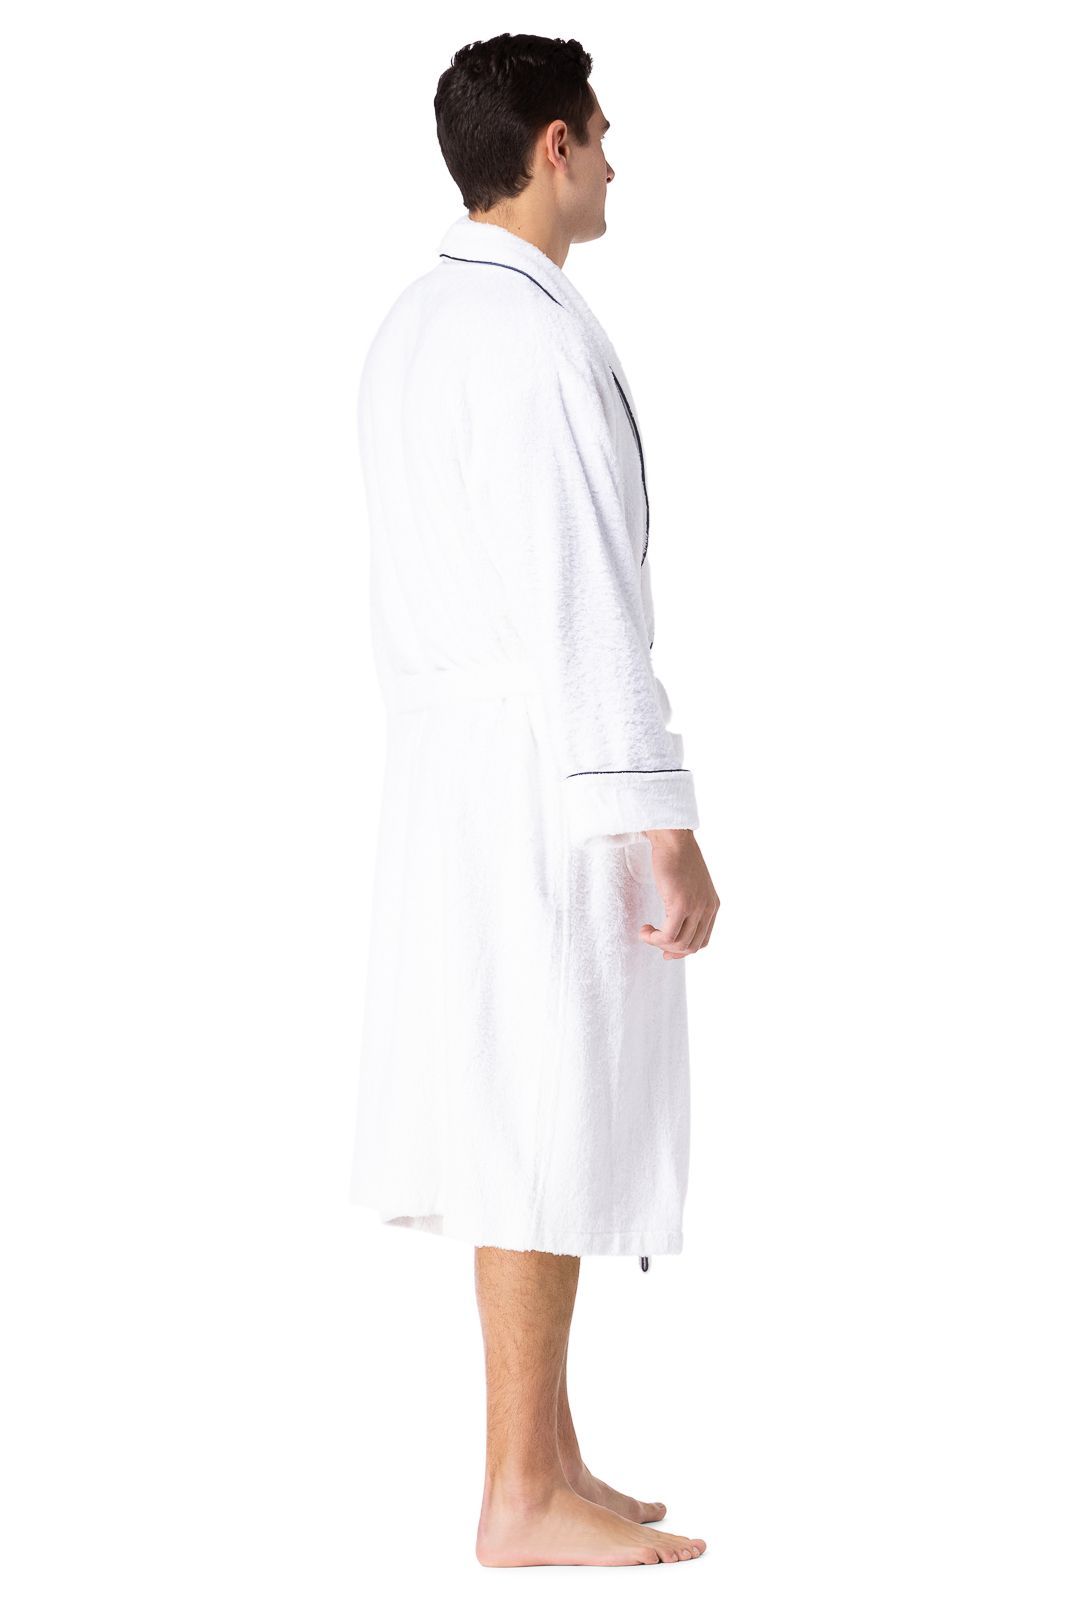 Men's Resort Style Terry Cloth Body Wrap | Fishers Finery